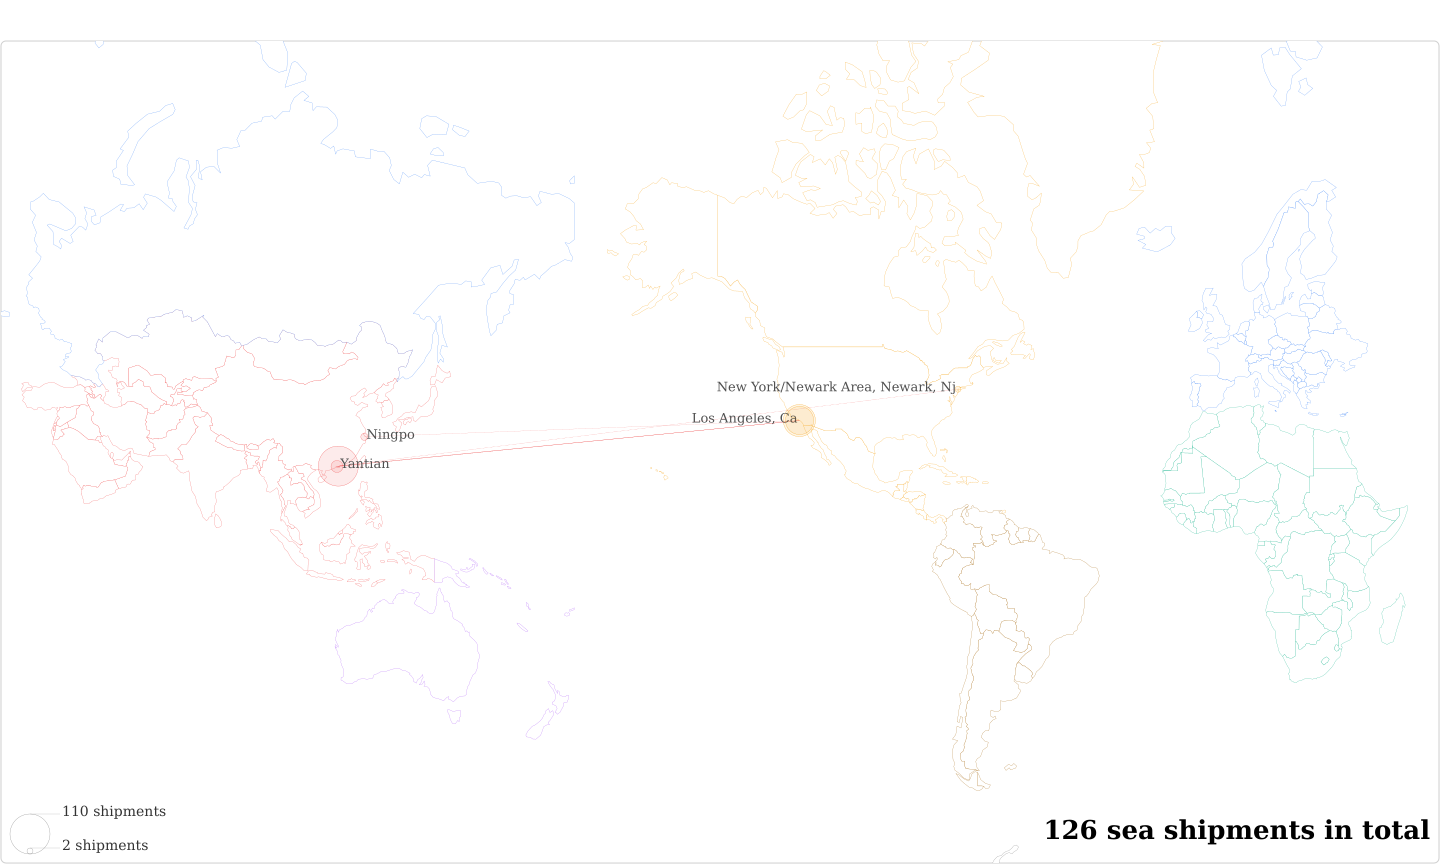 C/O Amazon Service's Imports Per Country Map